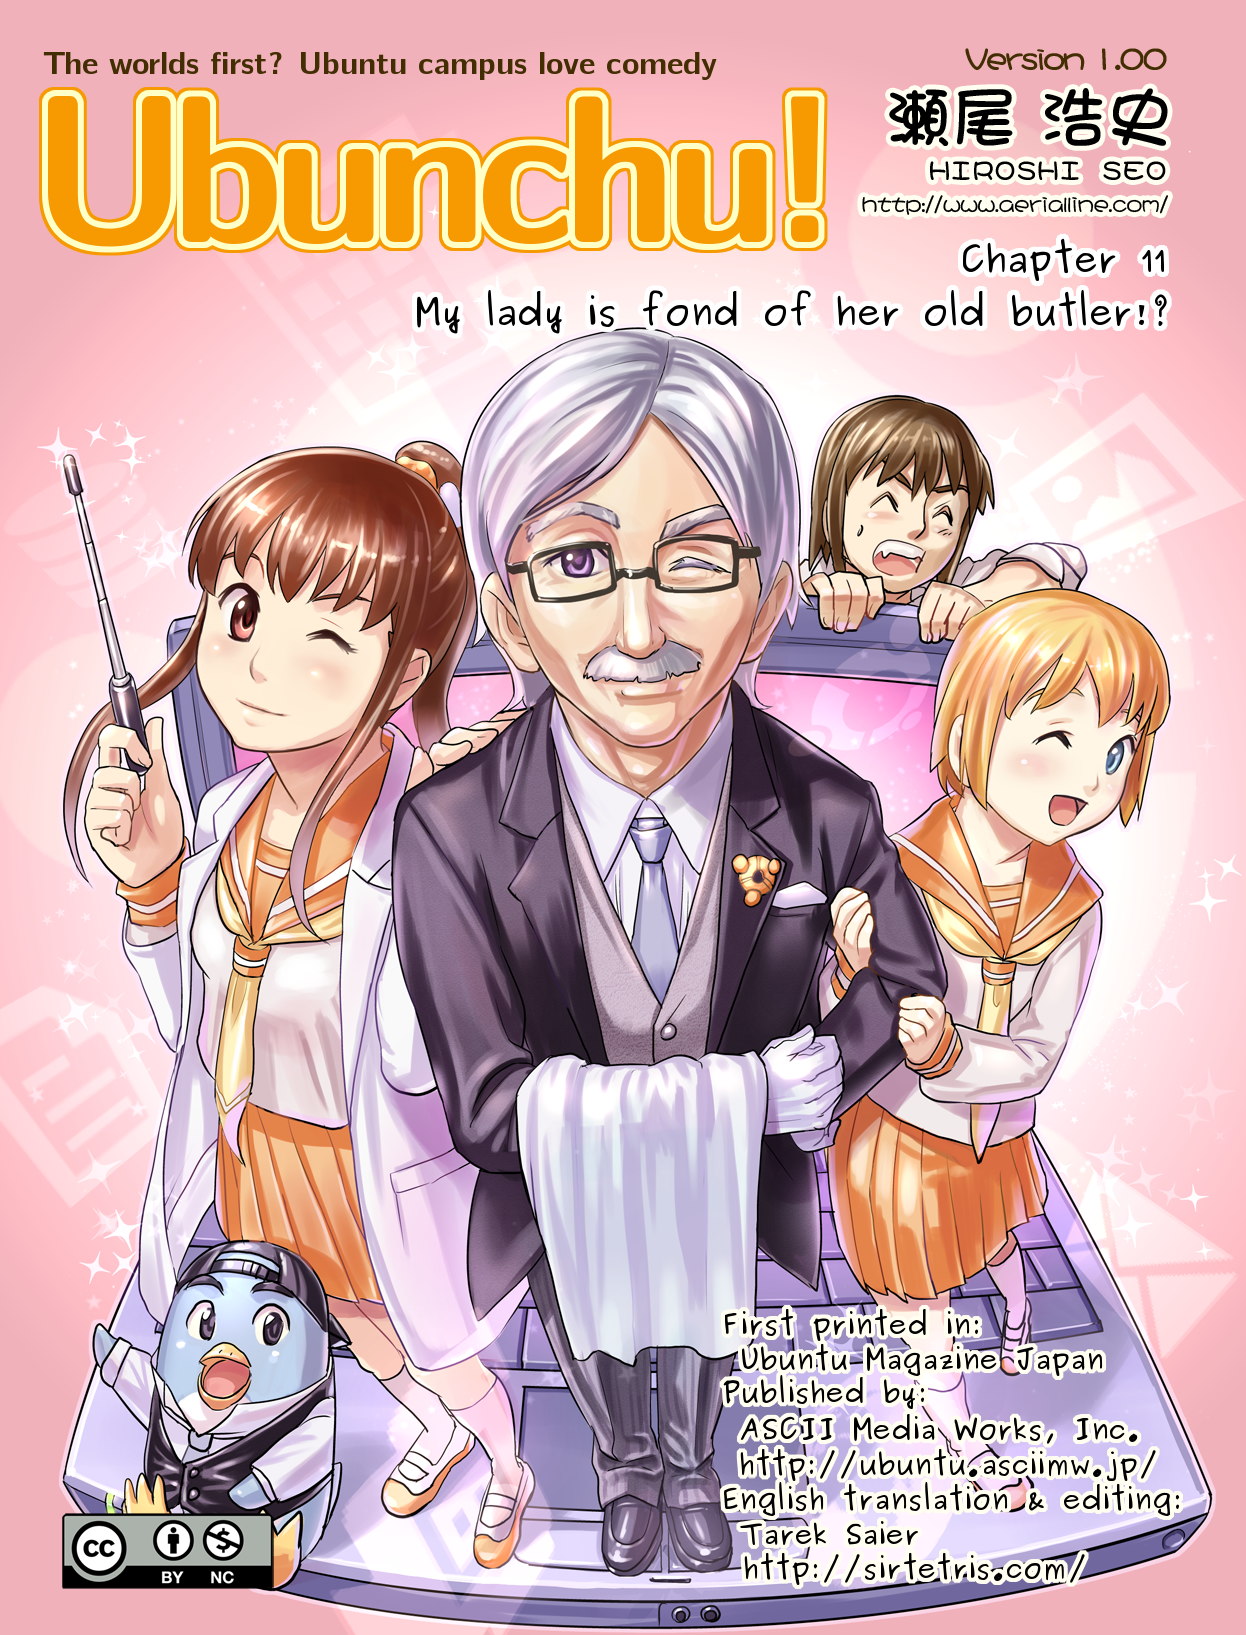 Ubunchu! Ch. 11 My lady is fond of her old butler!?